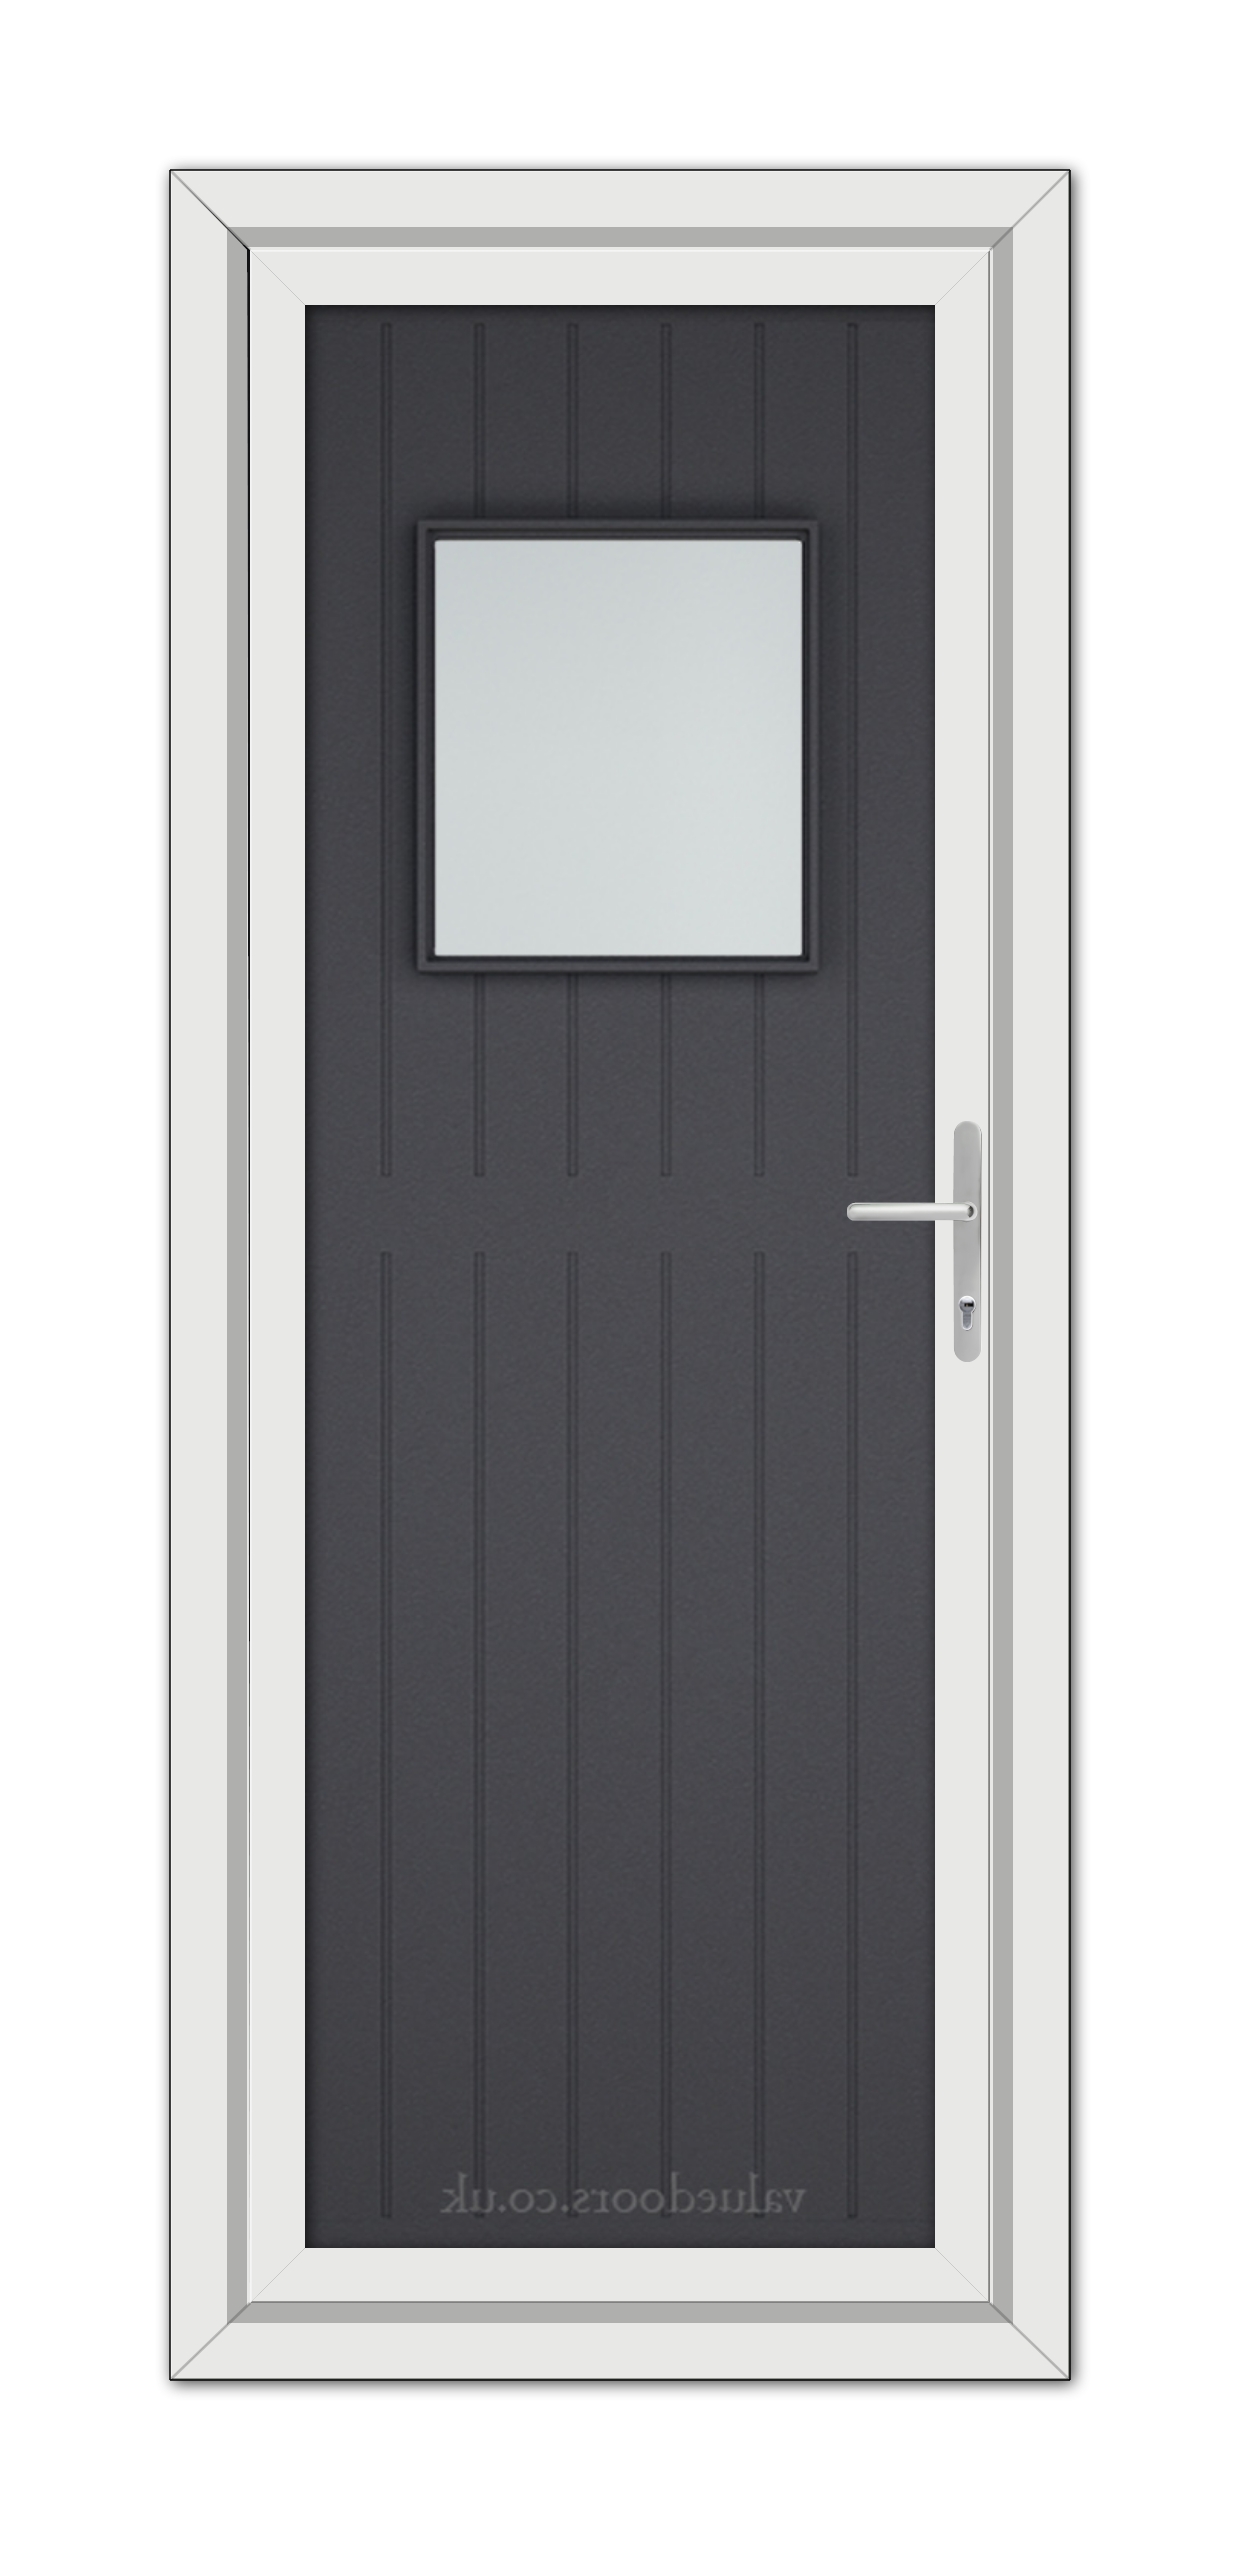 A modern Grey Grained Chatsworth uPVC Door with a square window at the top, surrounded by a white frame, featuring a silver handle on the right side.